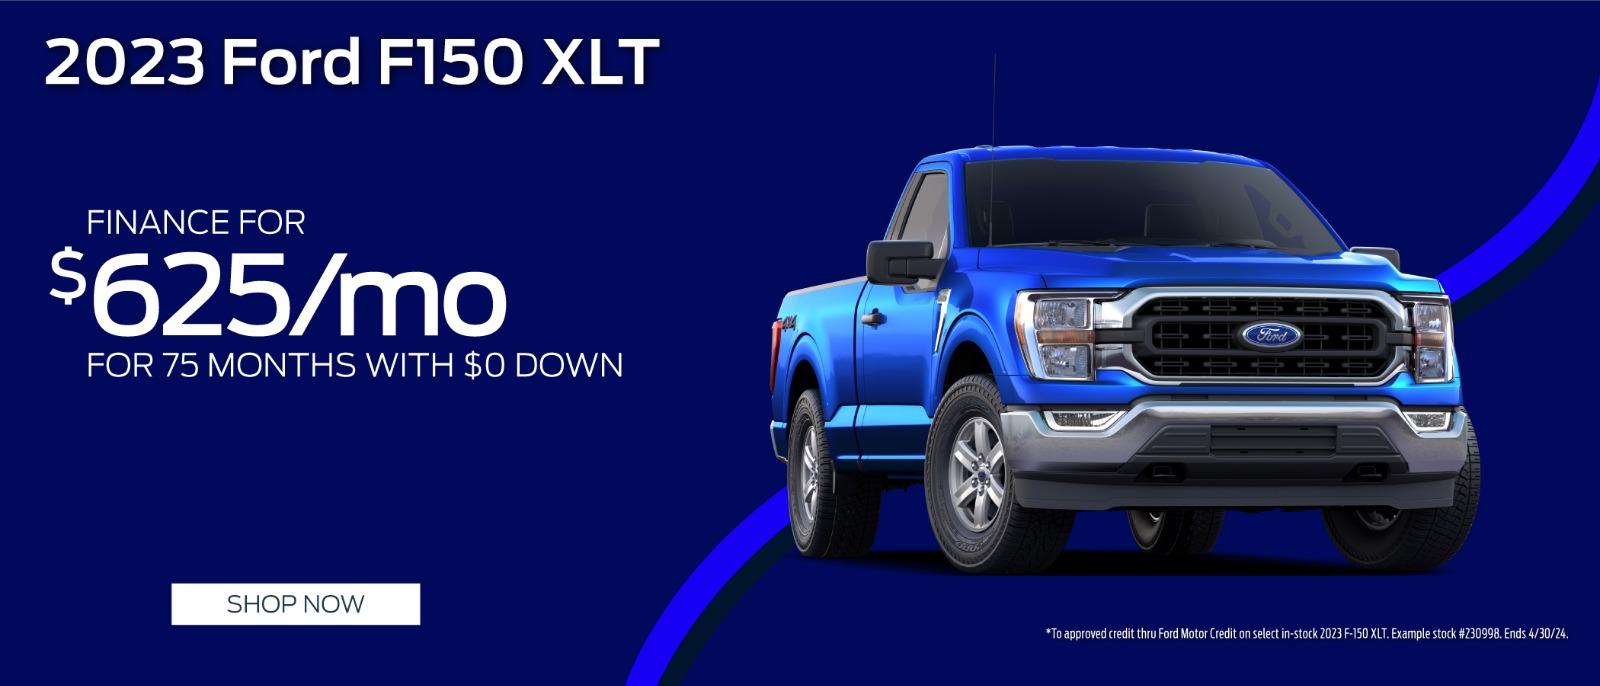 2023 Ford F-150  finance for $625 per month for 75 months.